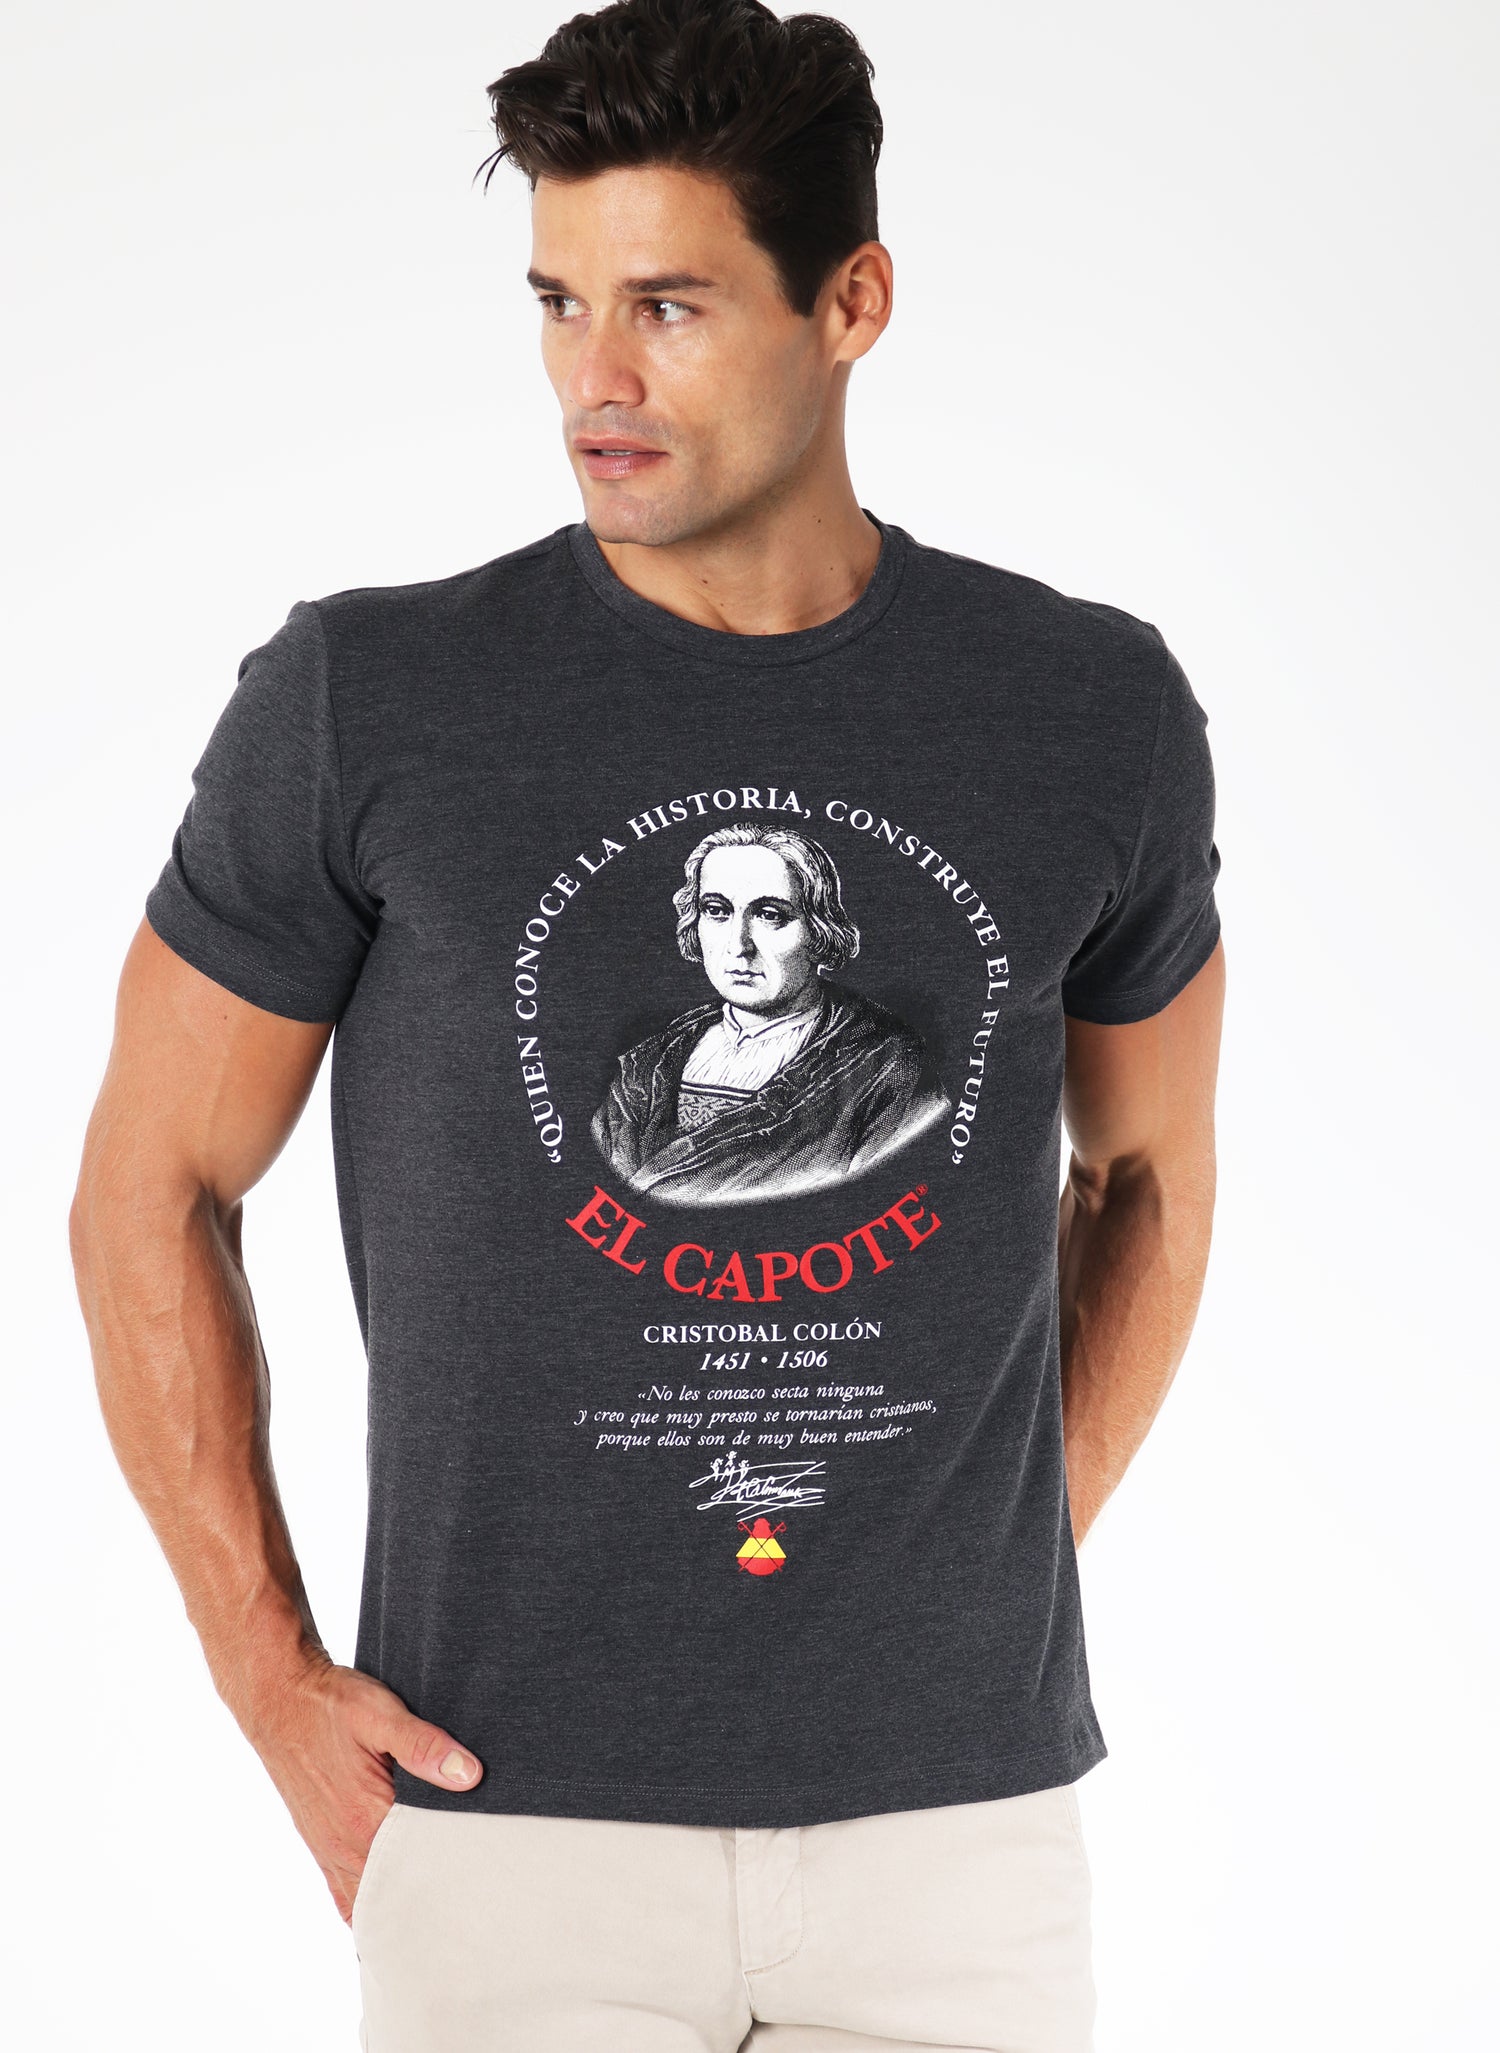 Anthracite Men's T-shirt Tribute to Christopher Columbus